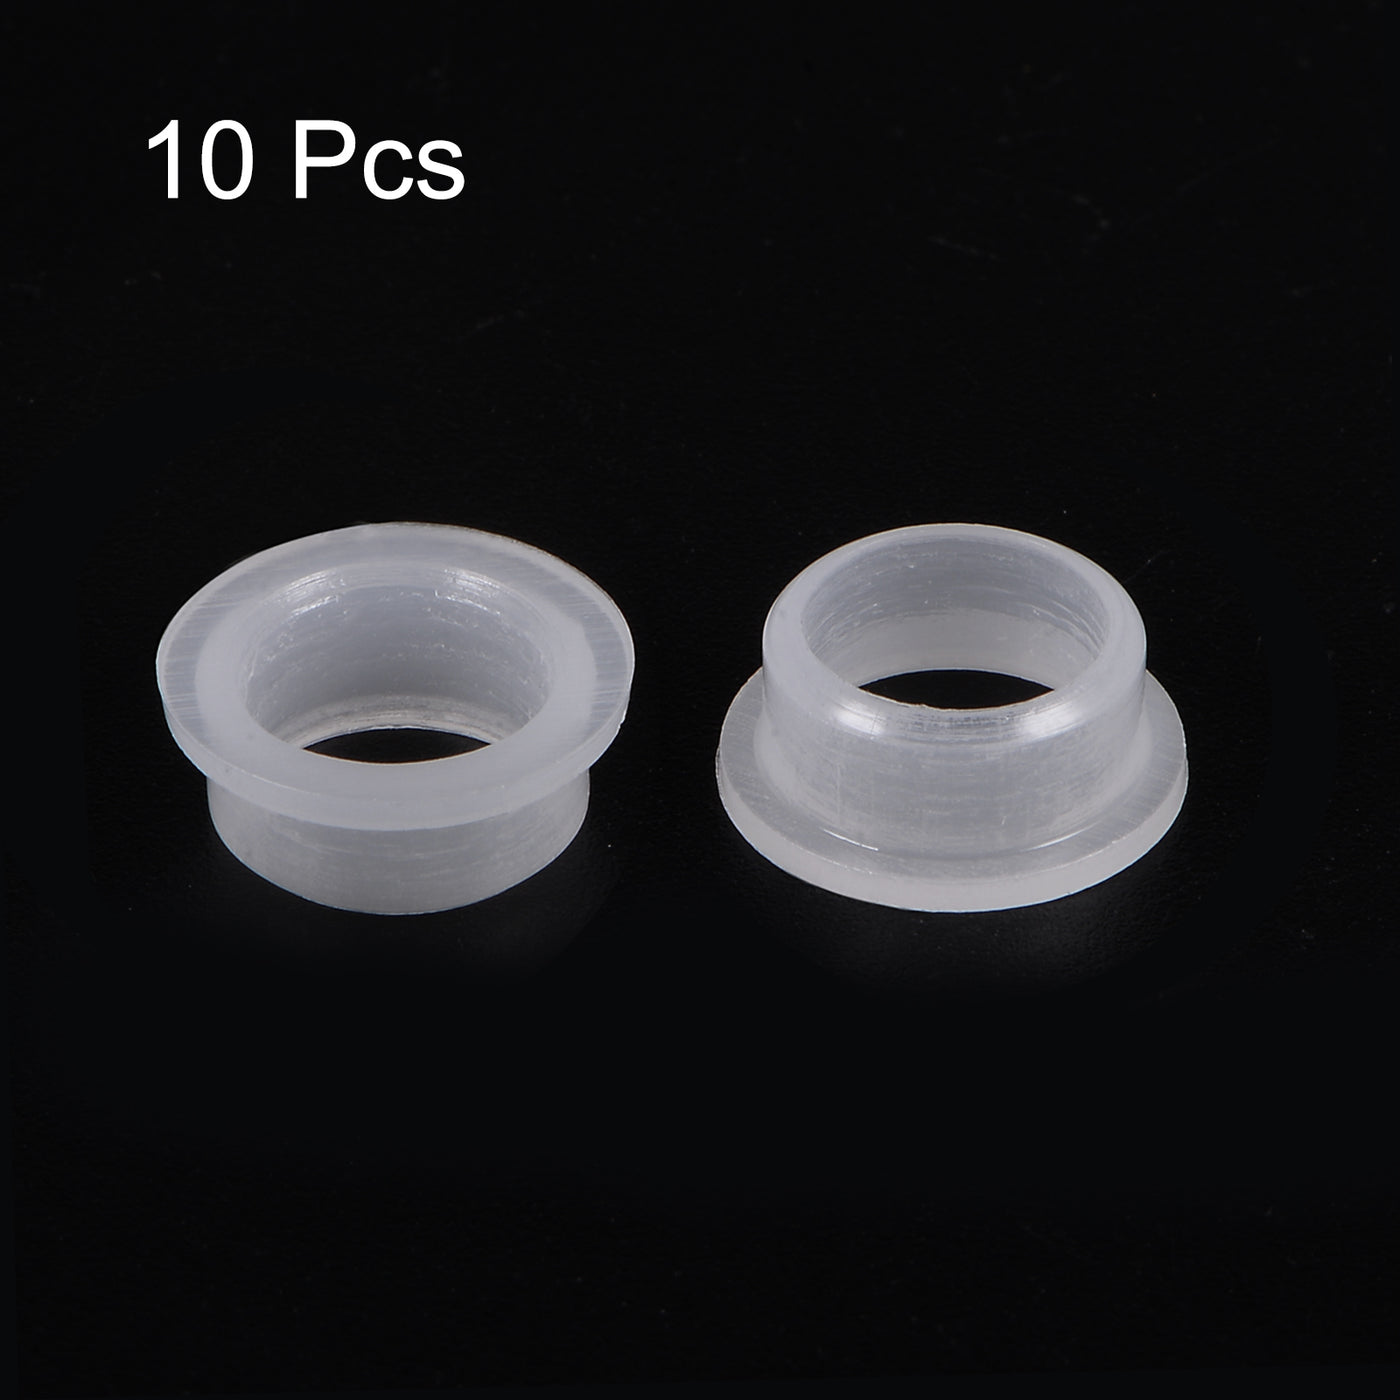 uxcell Uxcell 10pcs Flanged Sleeve Bearings 8.1mm ID 10.1mm OD 5mm Length Nylon Bushing, White